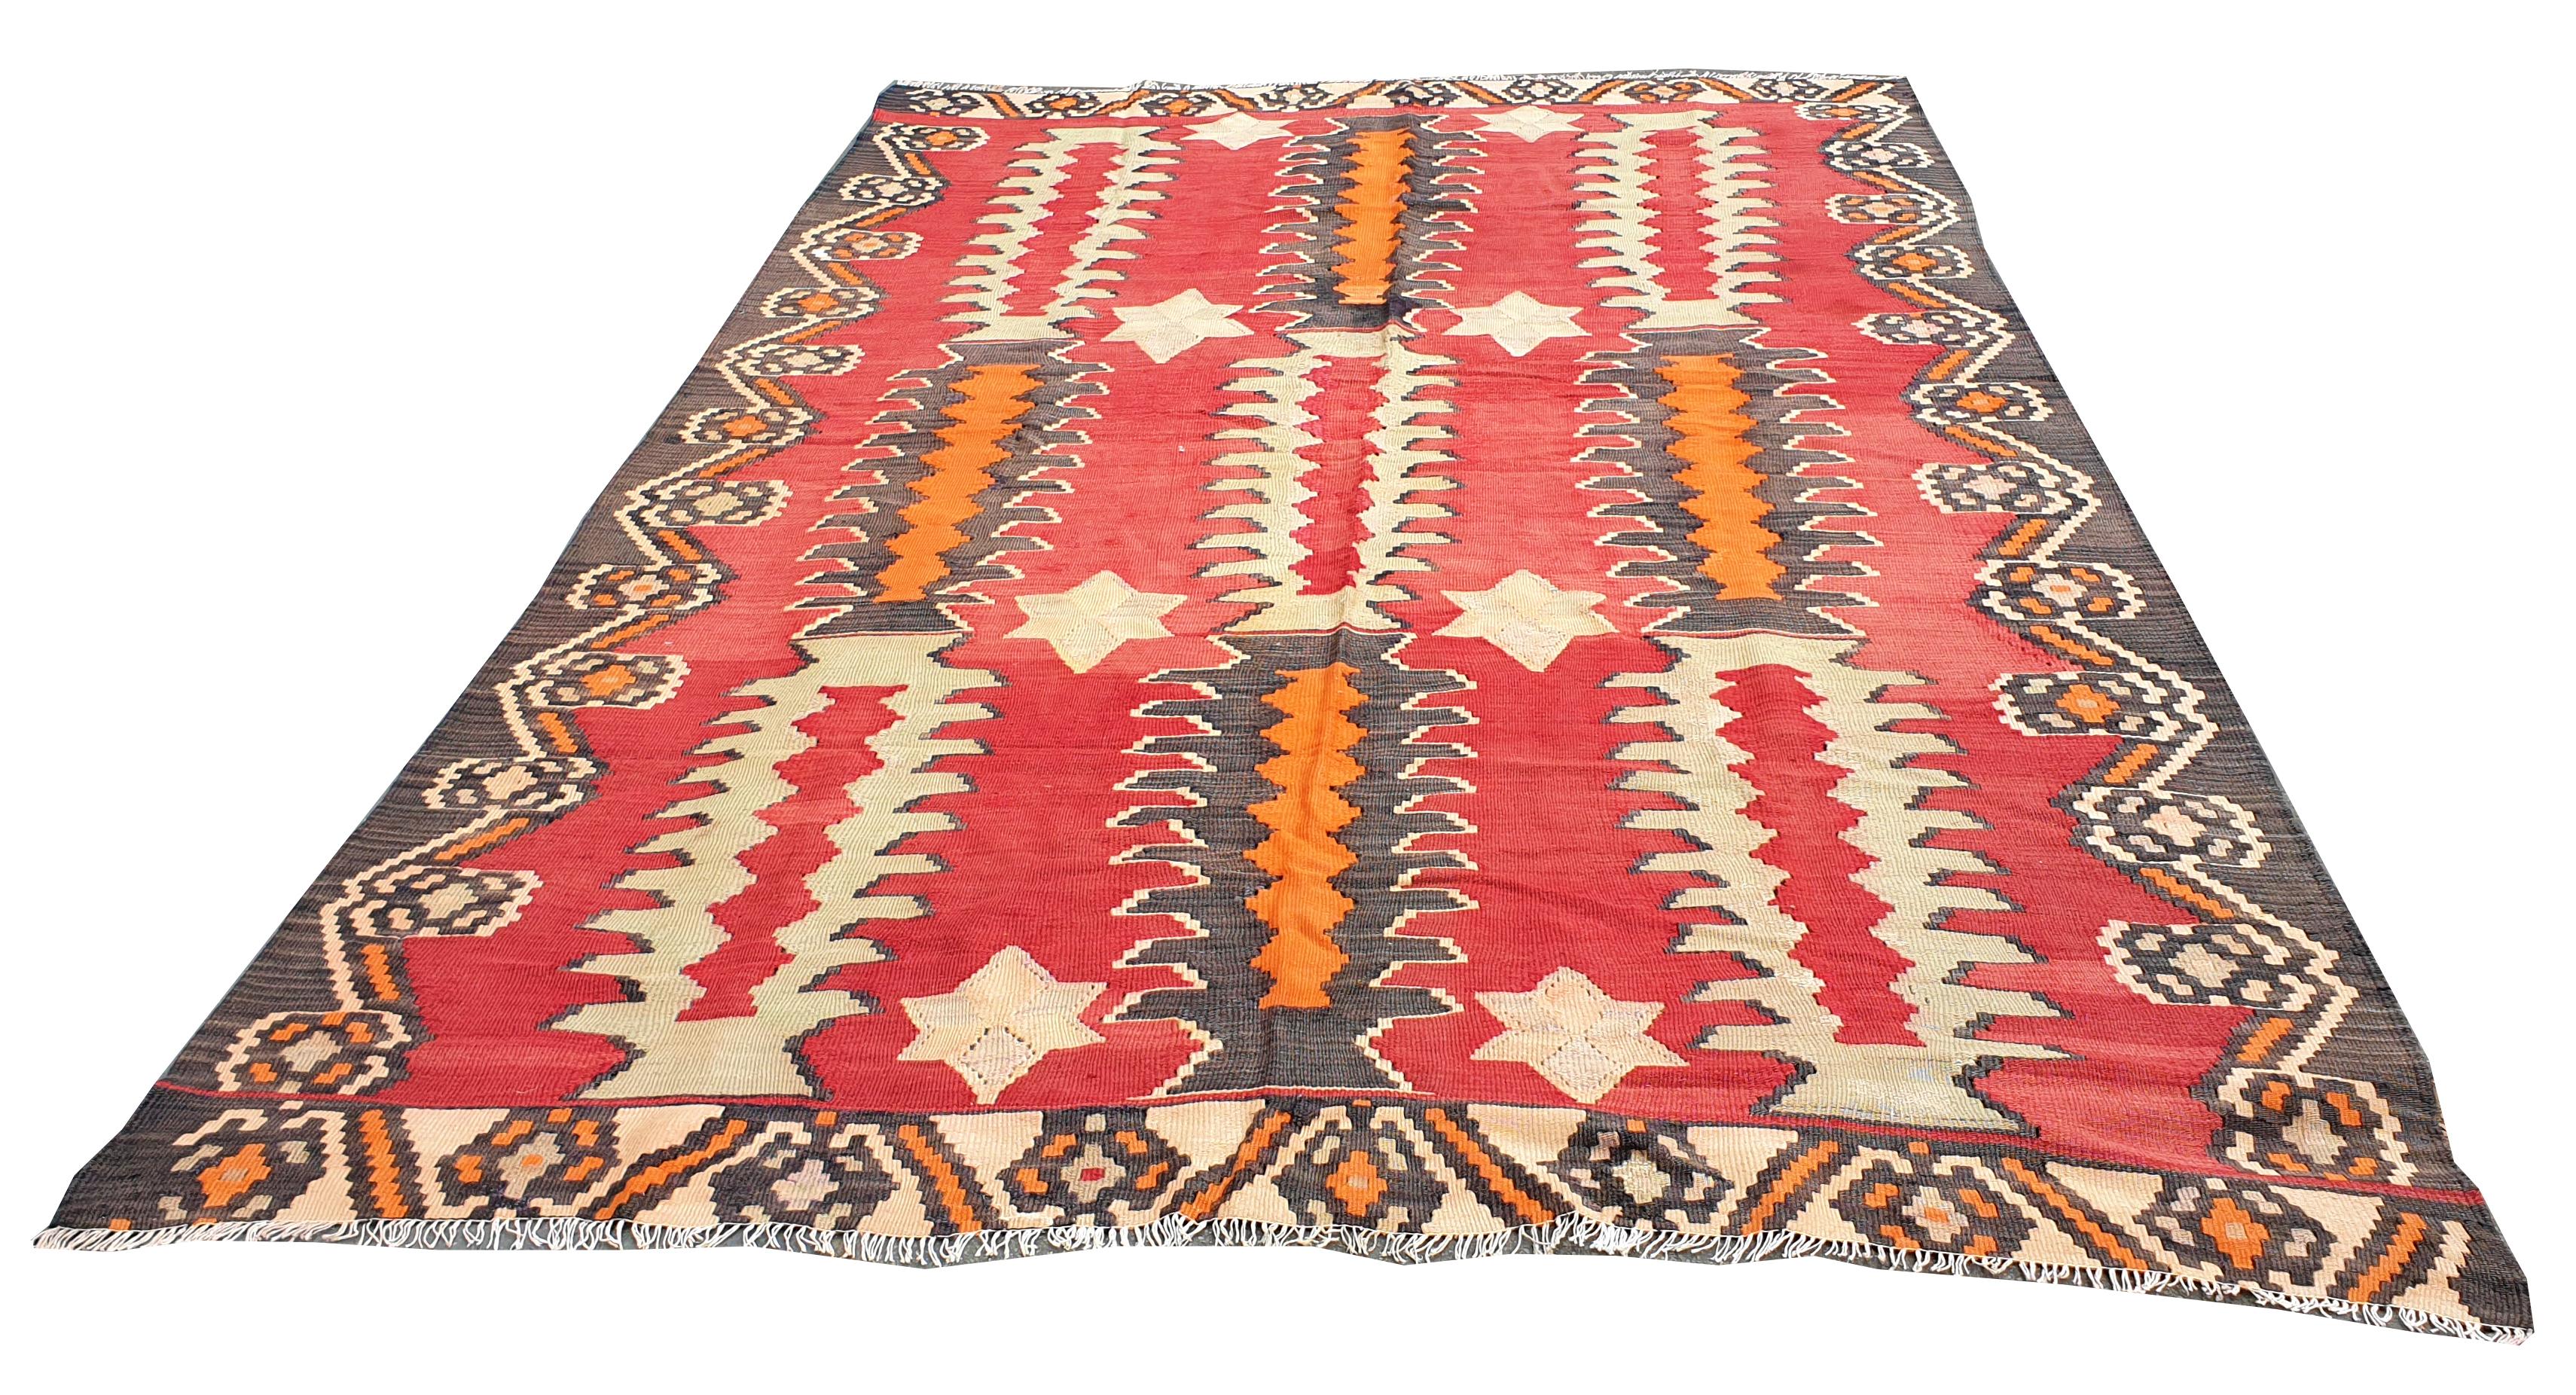 854 - pretty Turkish Kilim from the mid-20th century, with an exceptional design and pretty colors with red, orange, yellow, entirely handwoven with wool on wool.